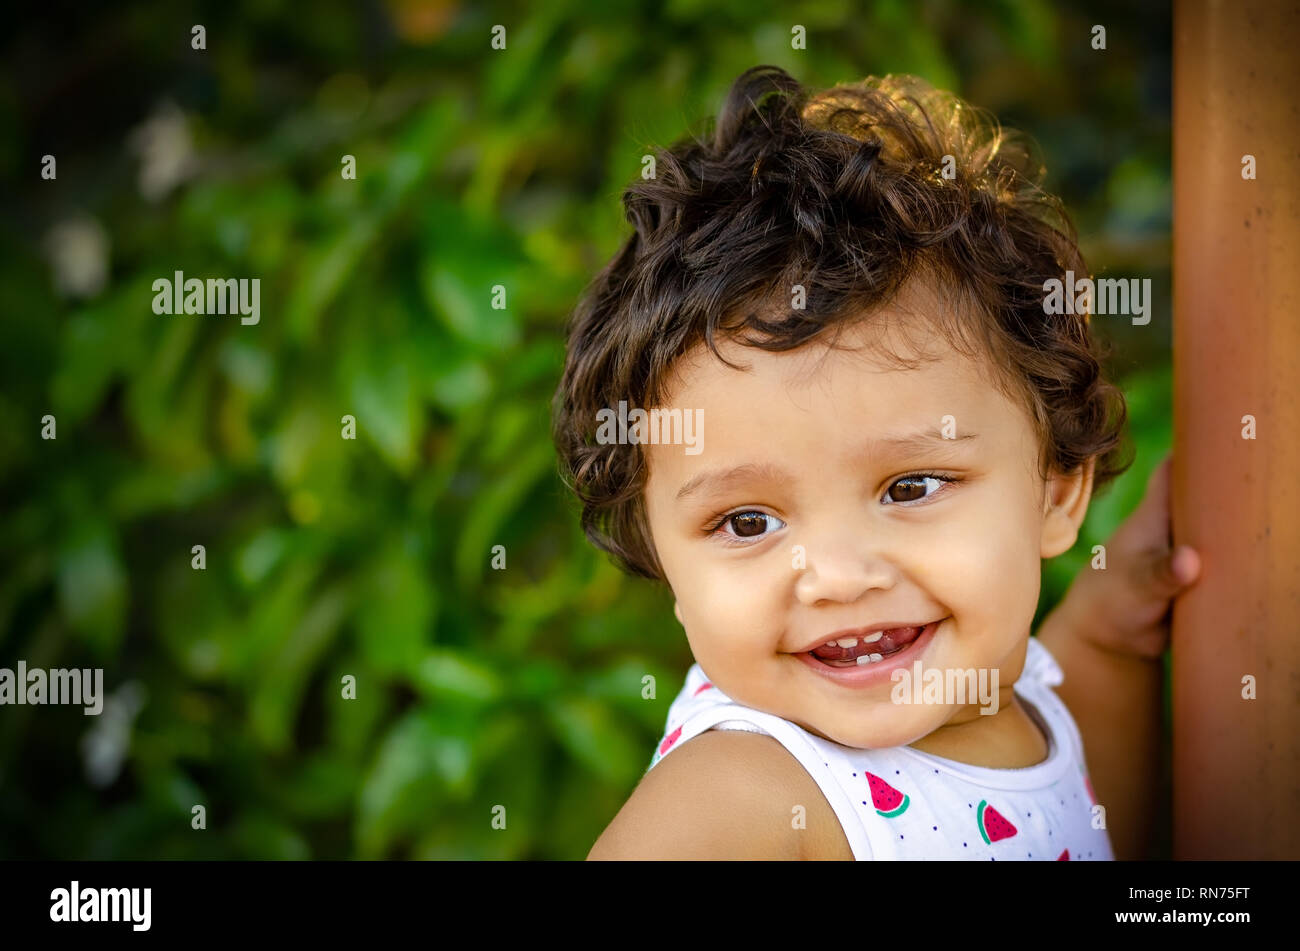 Closeup portrait of a happy Indian girl in the park with green background. Stock Photo